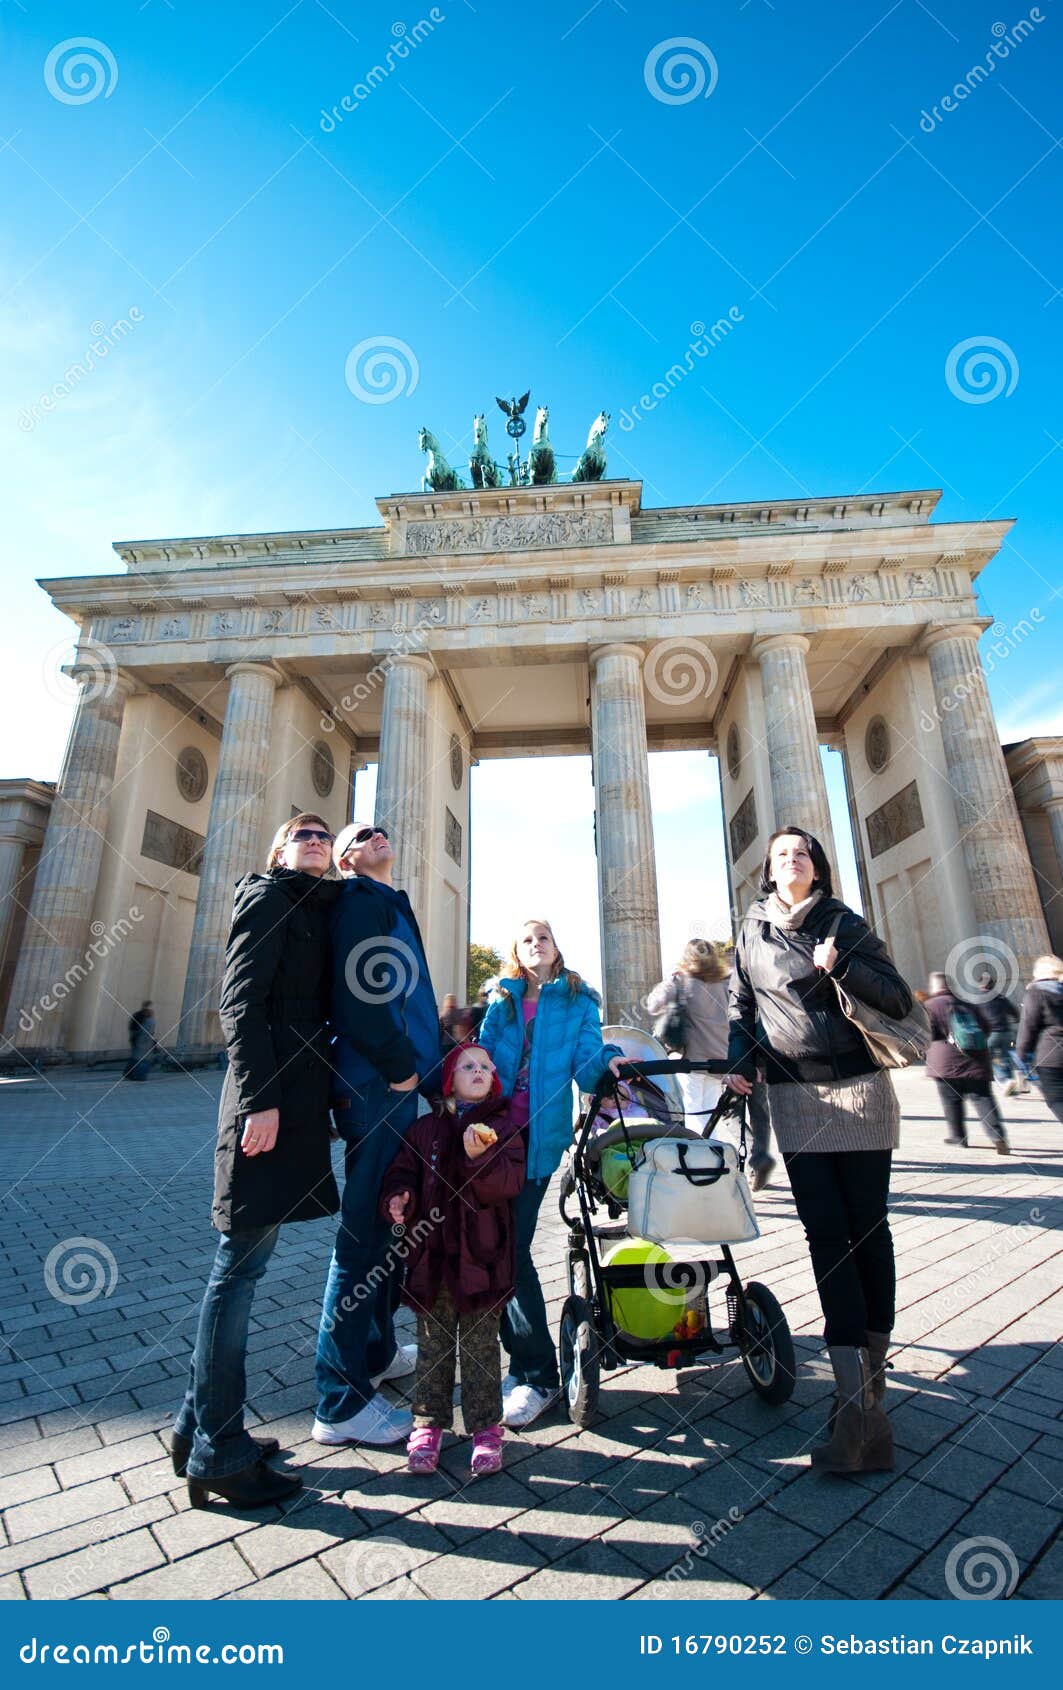 tourists in berlin